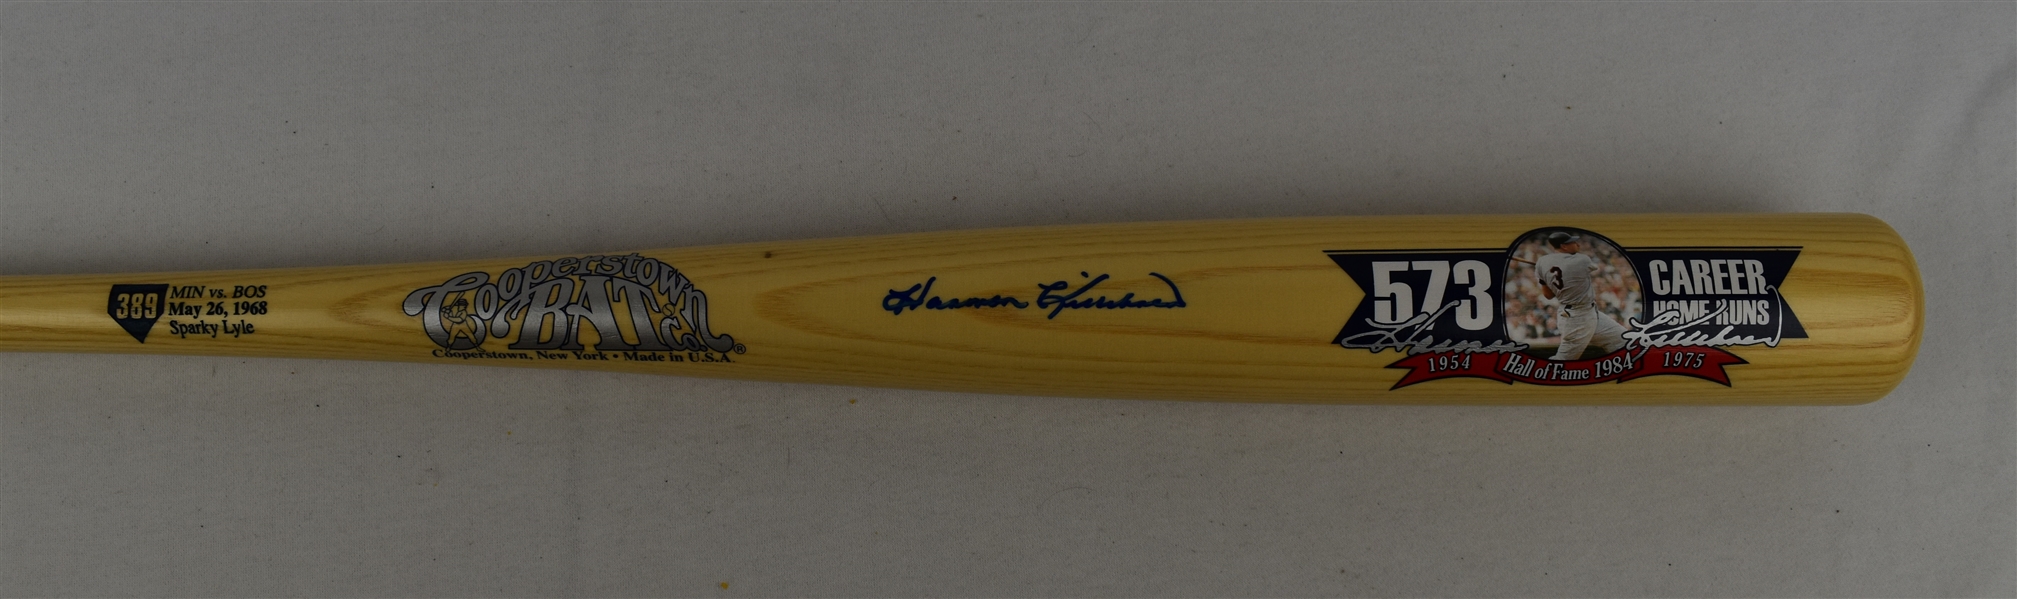 Harmon Killebrew Autographed Limited Edition Cooperstown Collection HR #389 Bat JSA